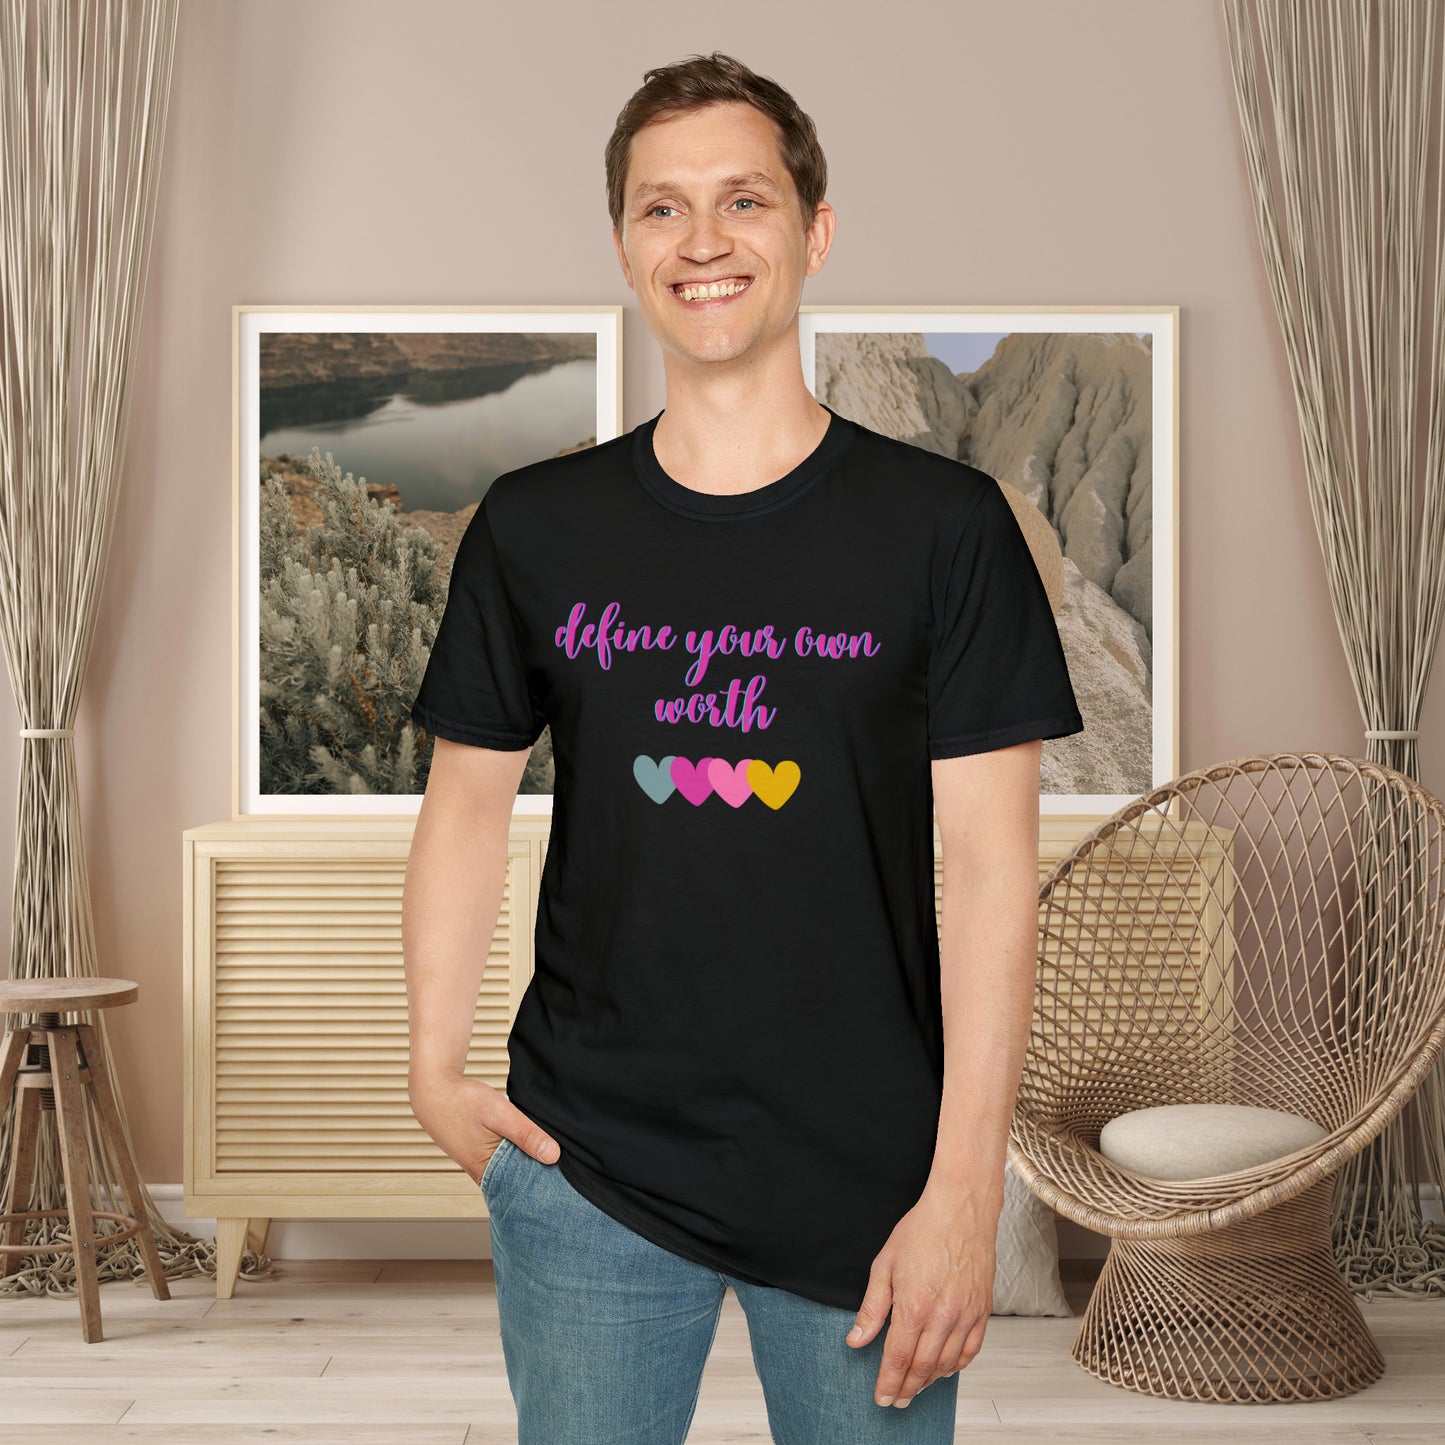 Motivational message to “define your own worth” instead of letting others do it for you on this Unisex Softstyle T-Shirt.